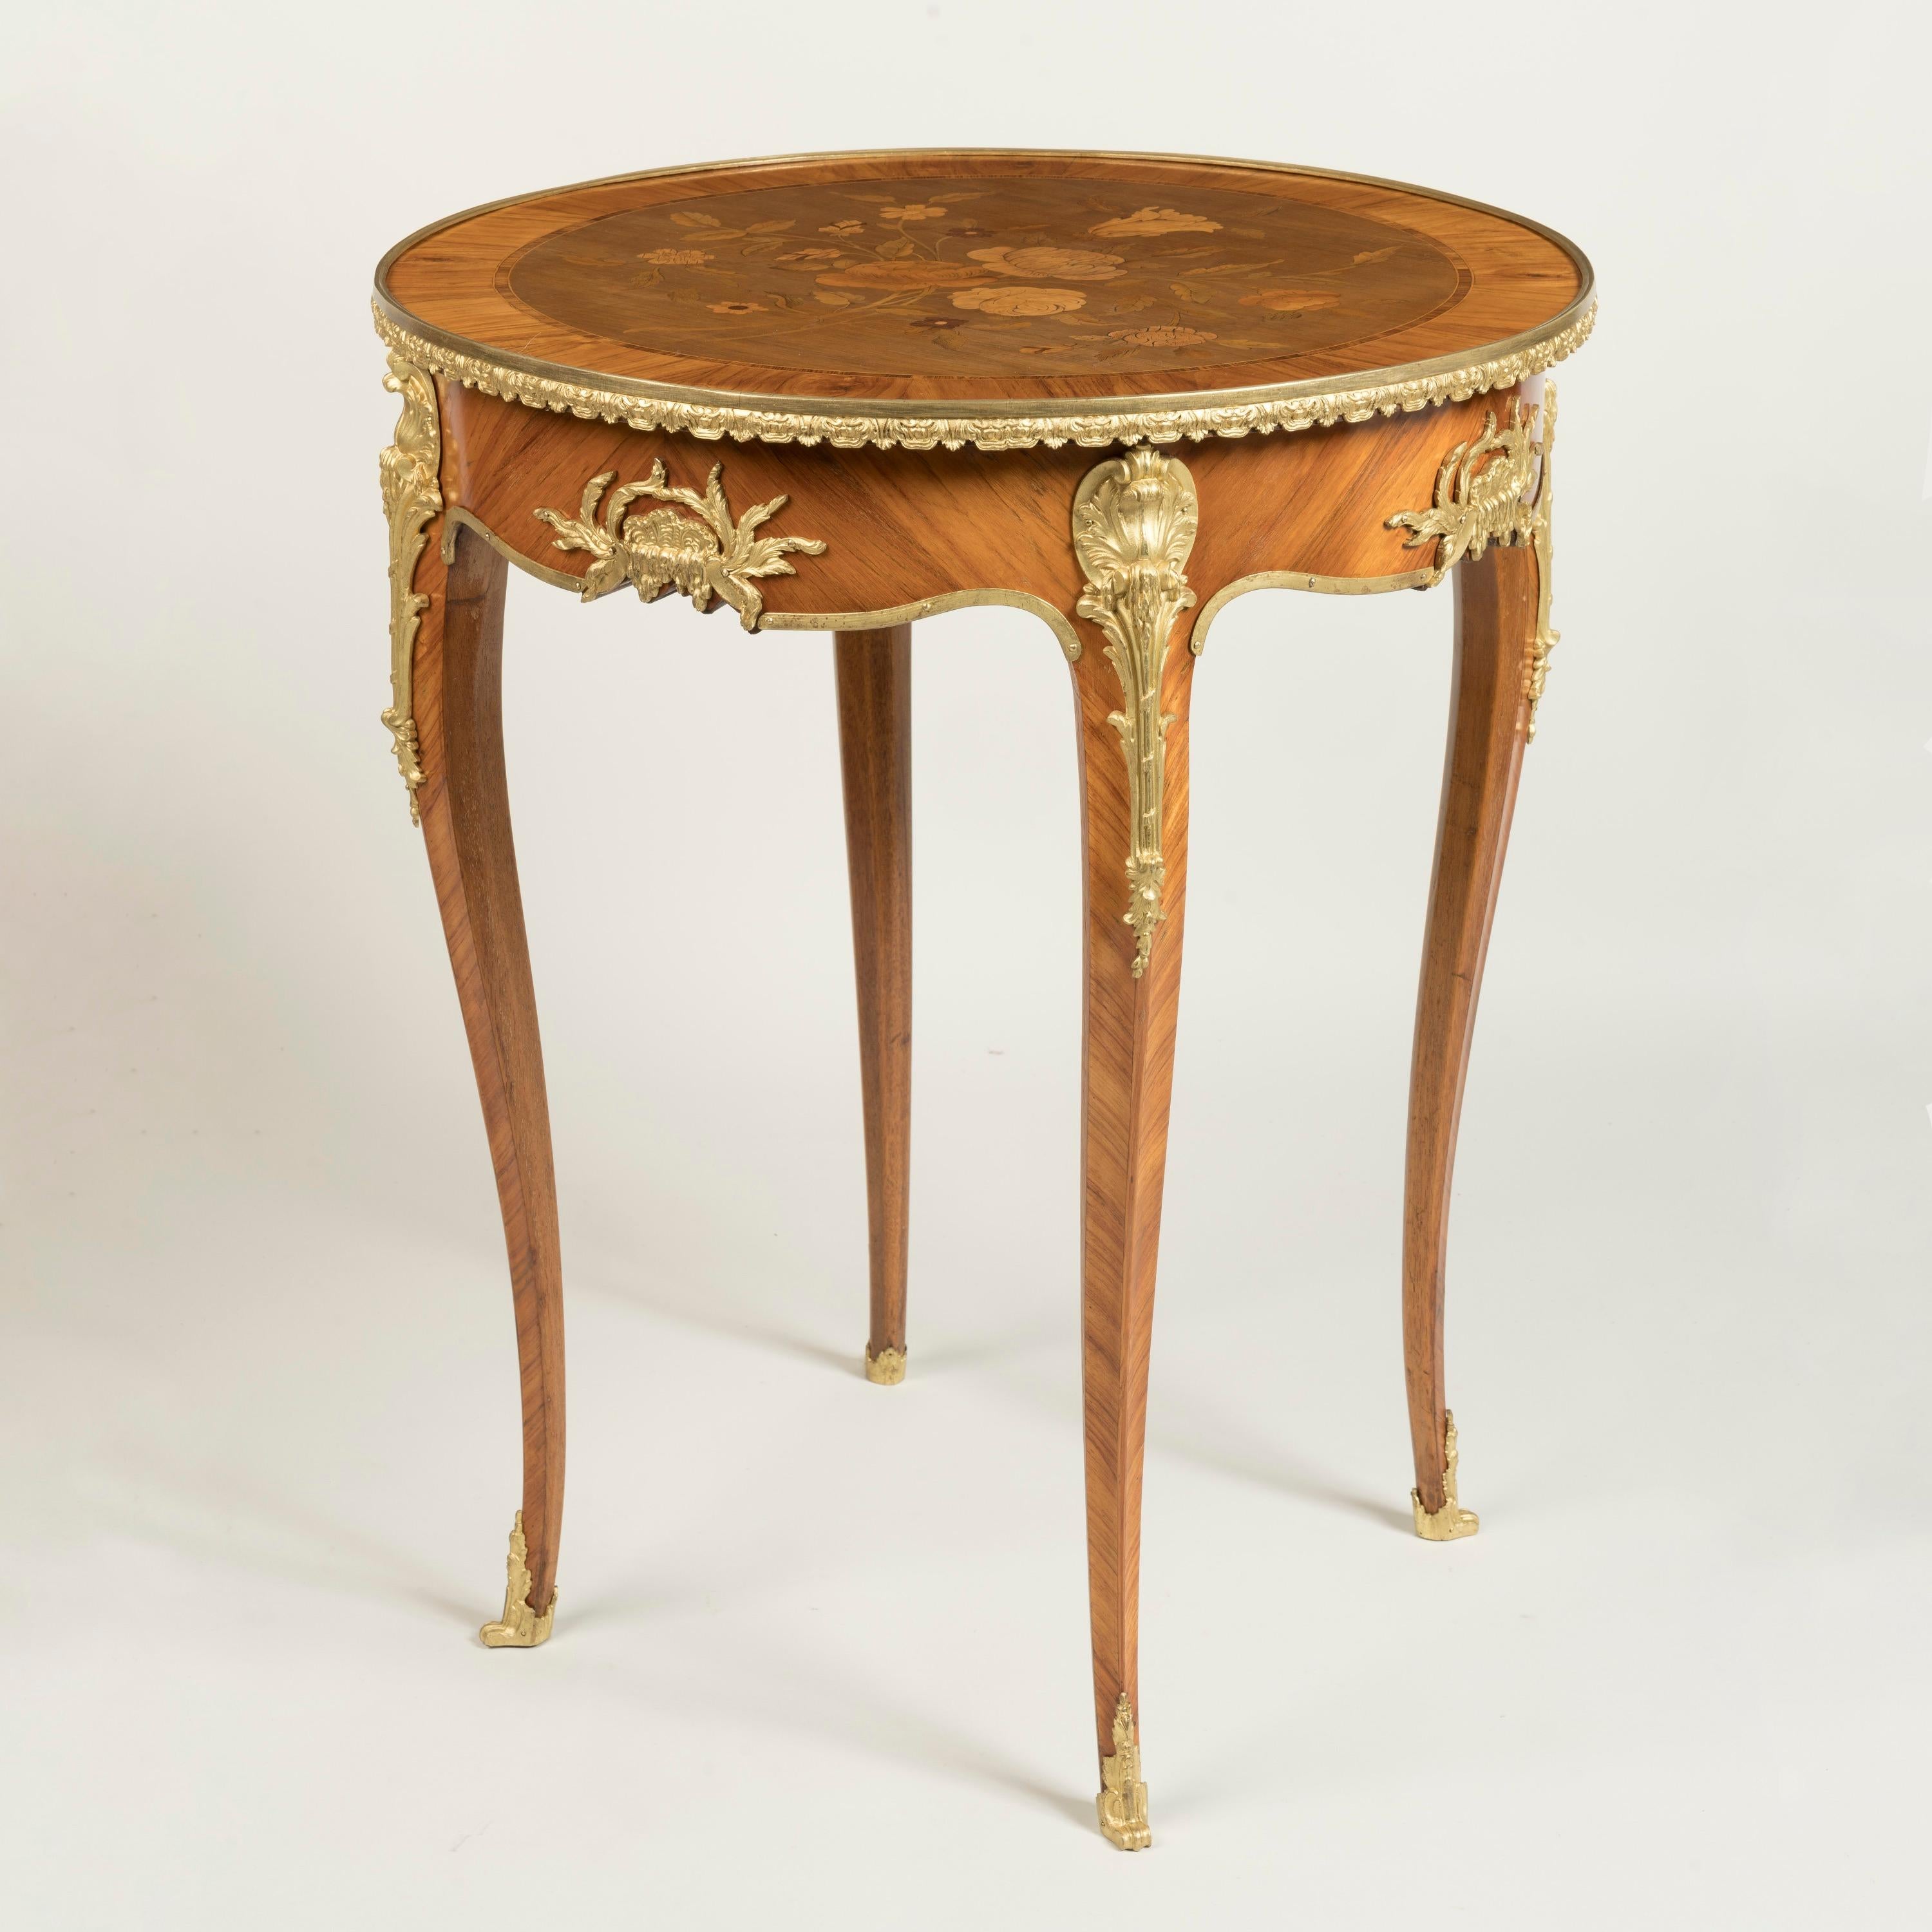 French 19th Century Marquetry Inlaid & Ormolu Table attributed to François Linke For Sale